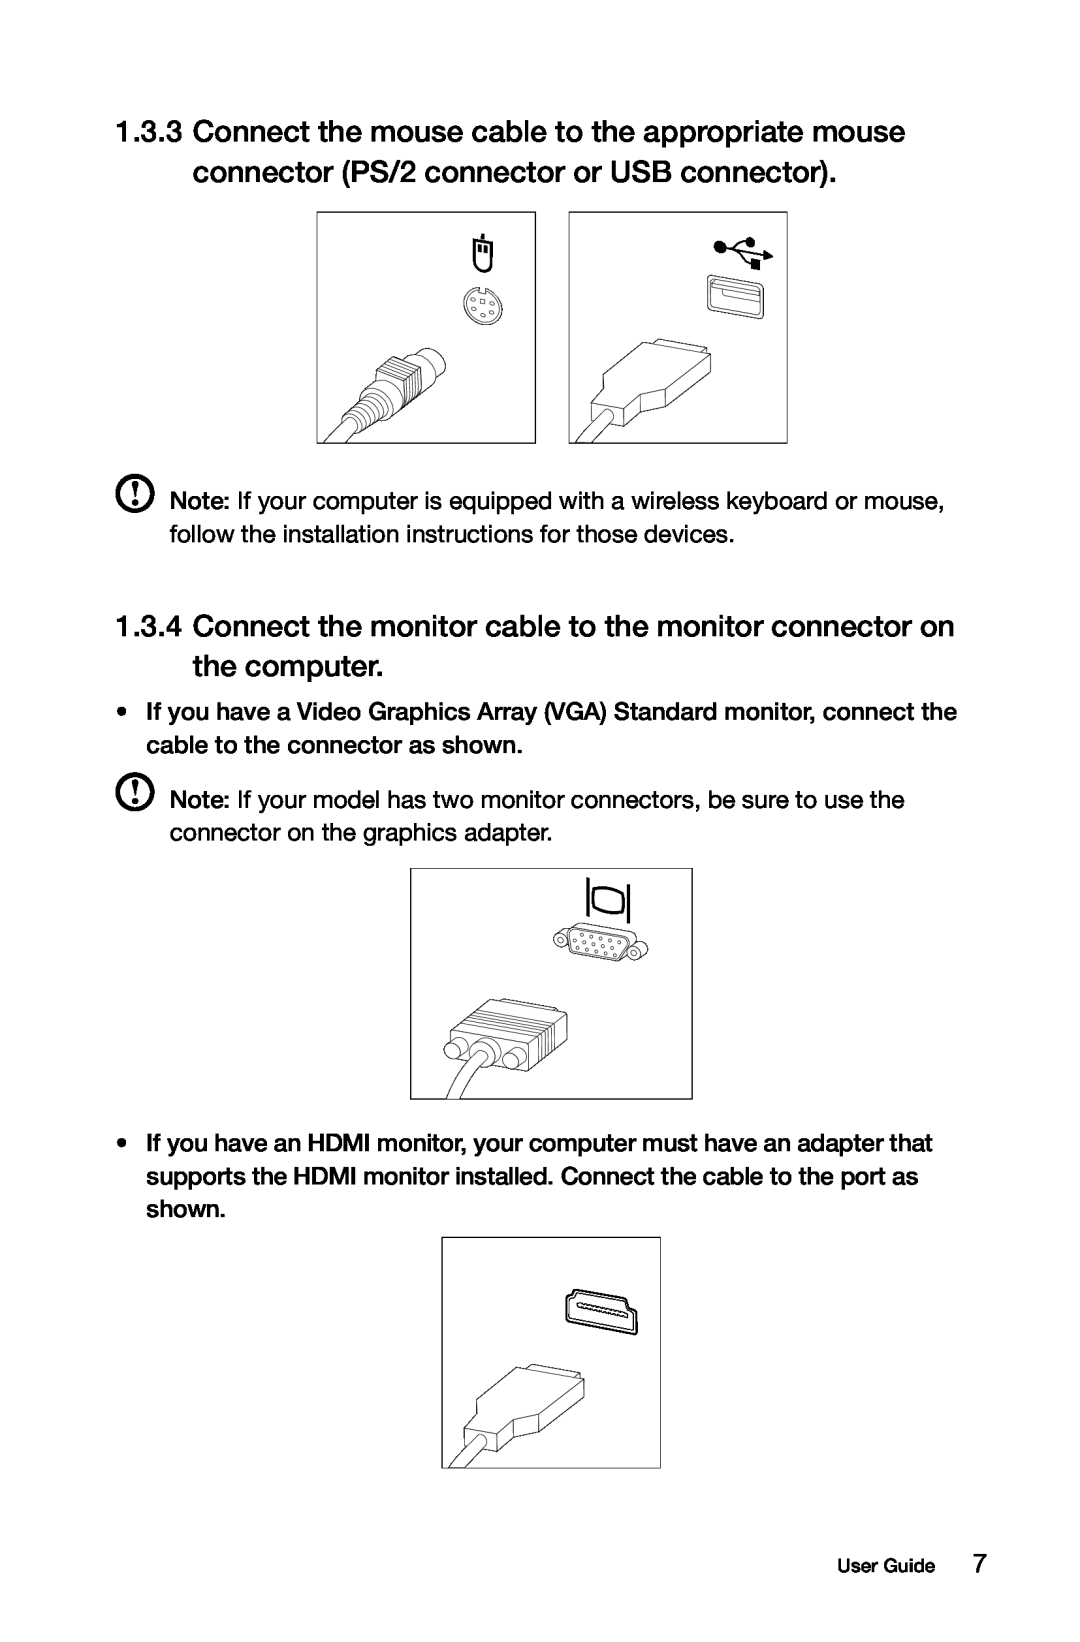 Lenovo 10073/1169, 10067/7748 Connect the mouse cable to the appropriate mouse connector PS/2 connector or USB connector 